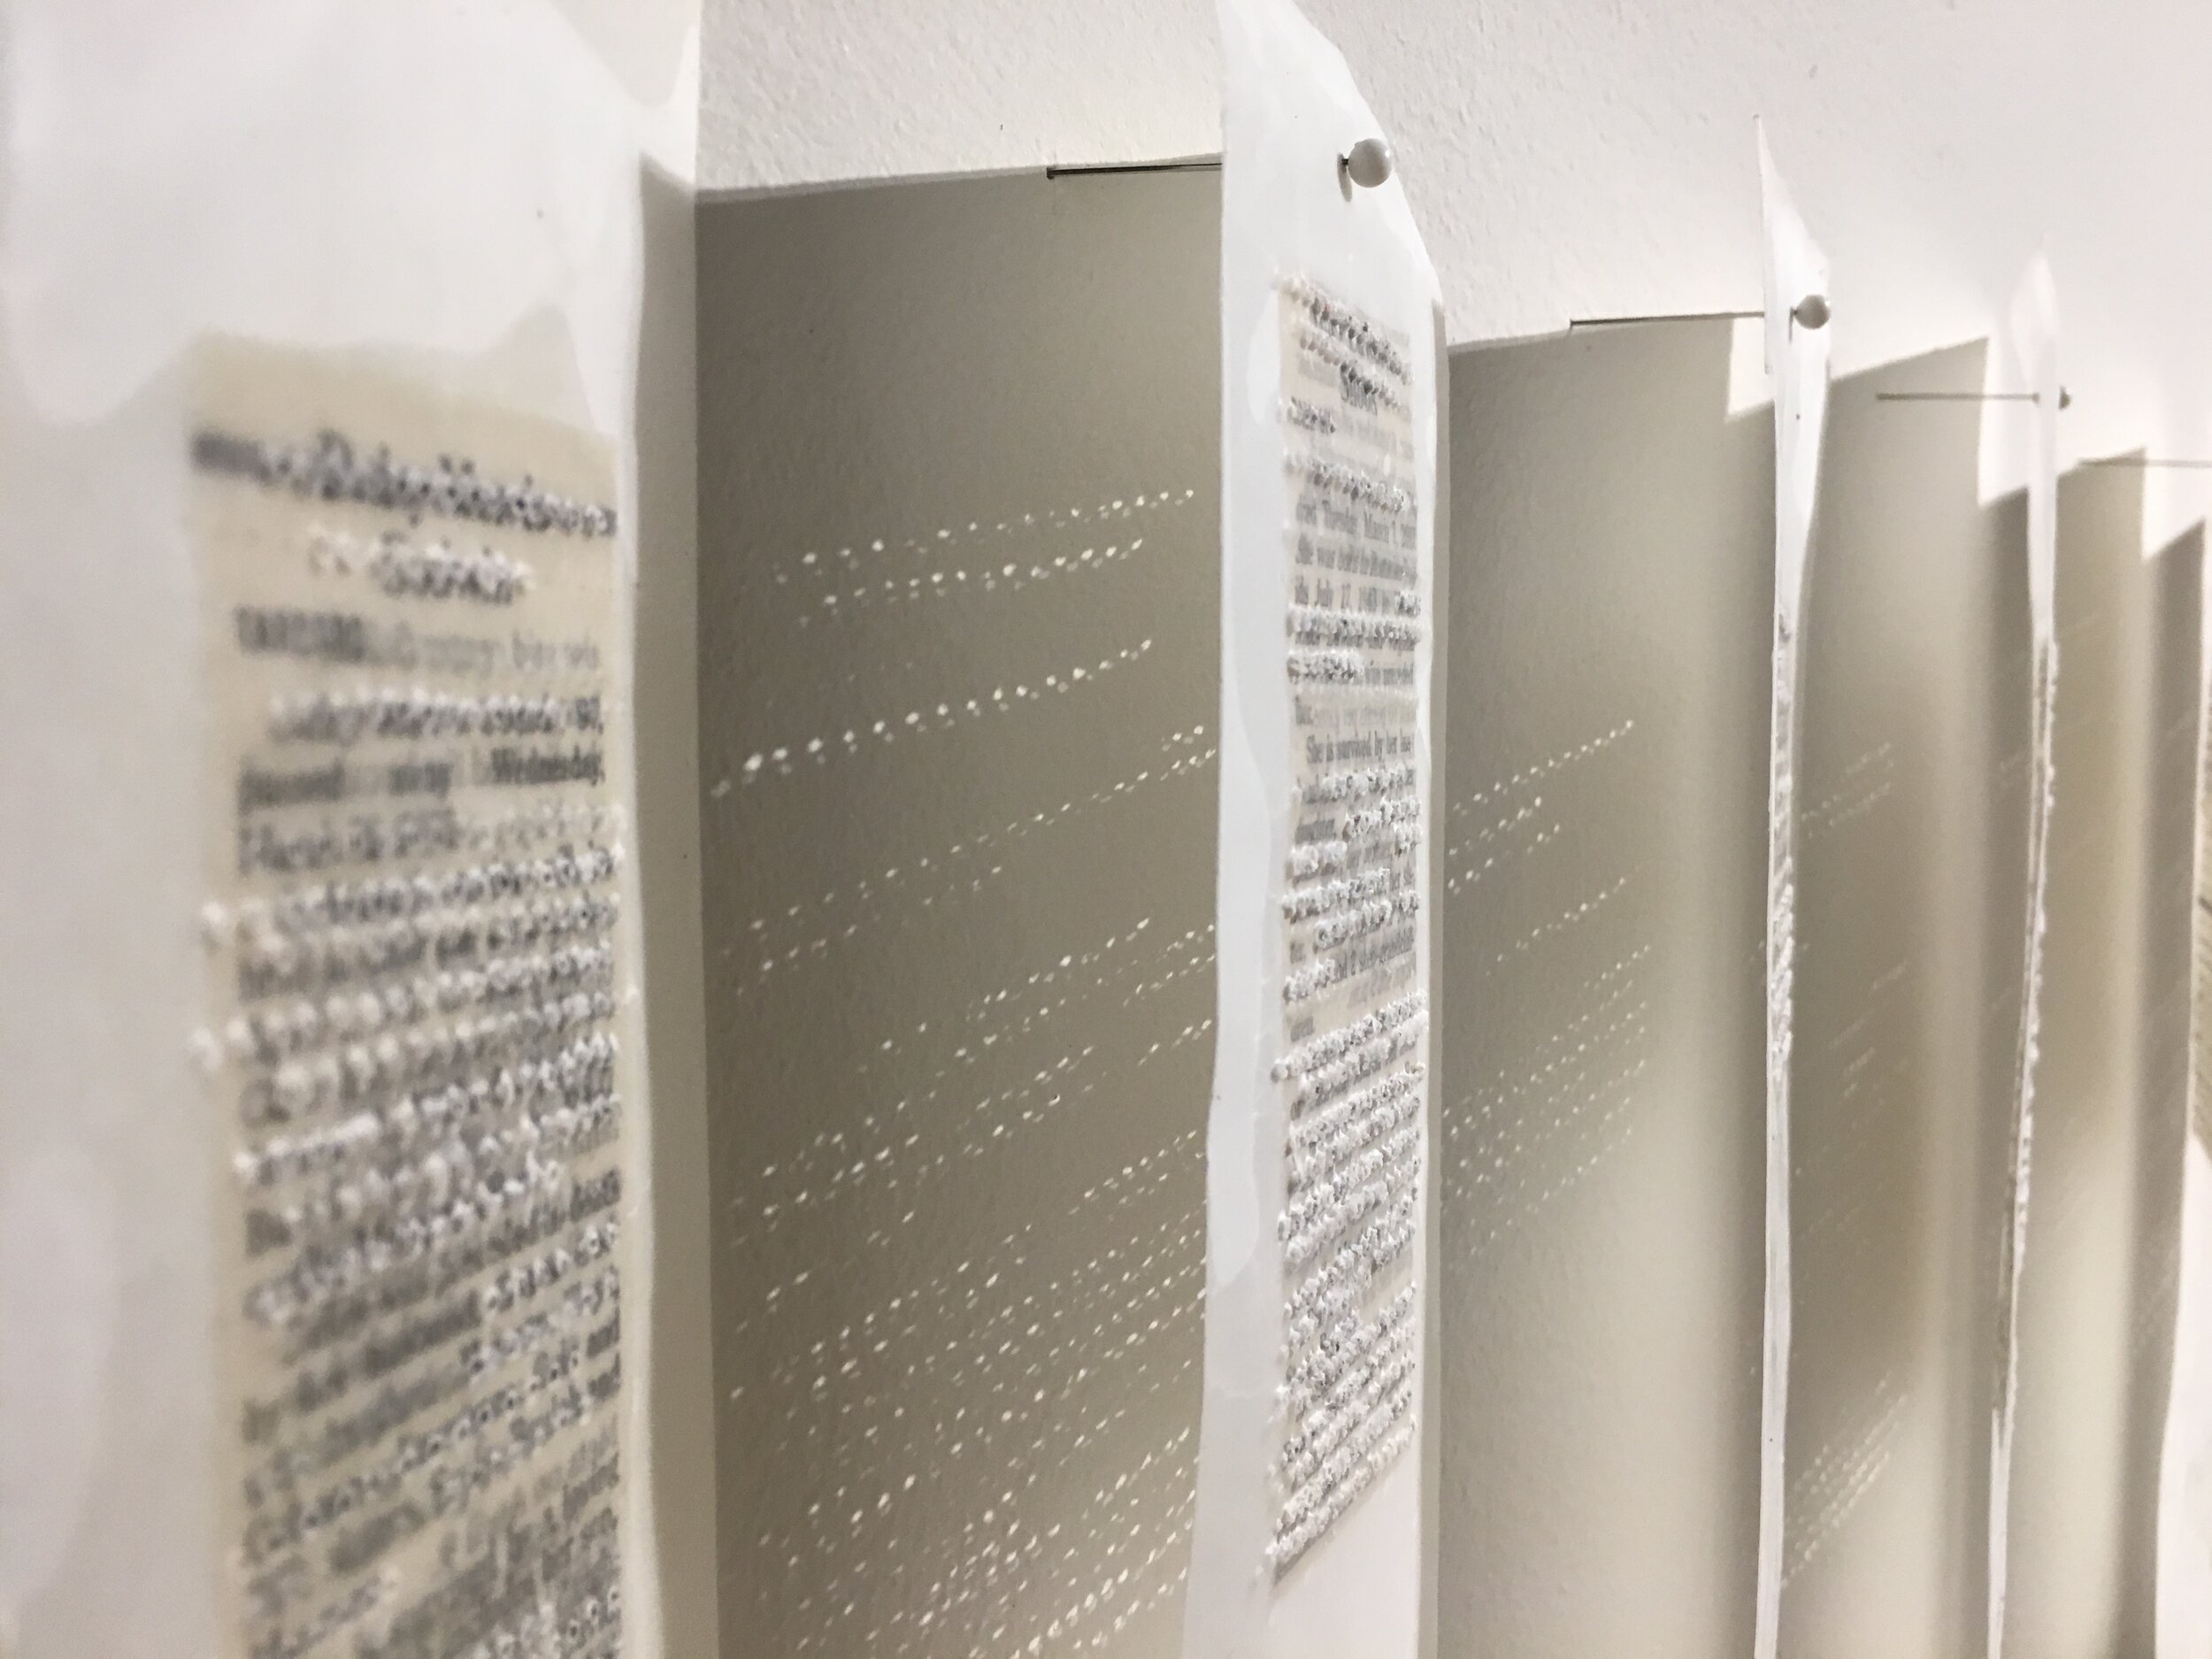 detail of obituaries encased in paper, waxed. holes visible. light filtering through holes onto gallery wall.